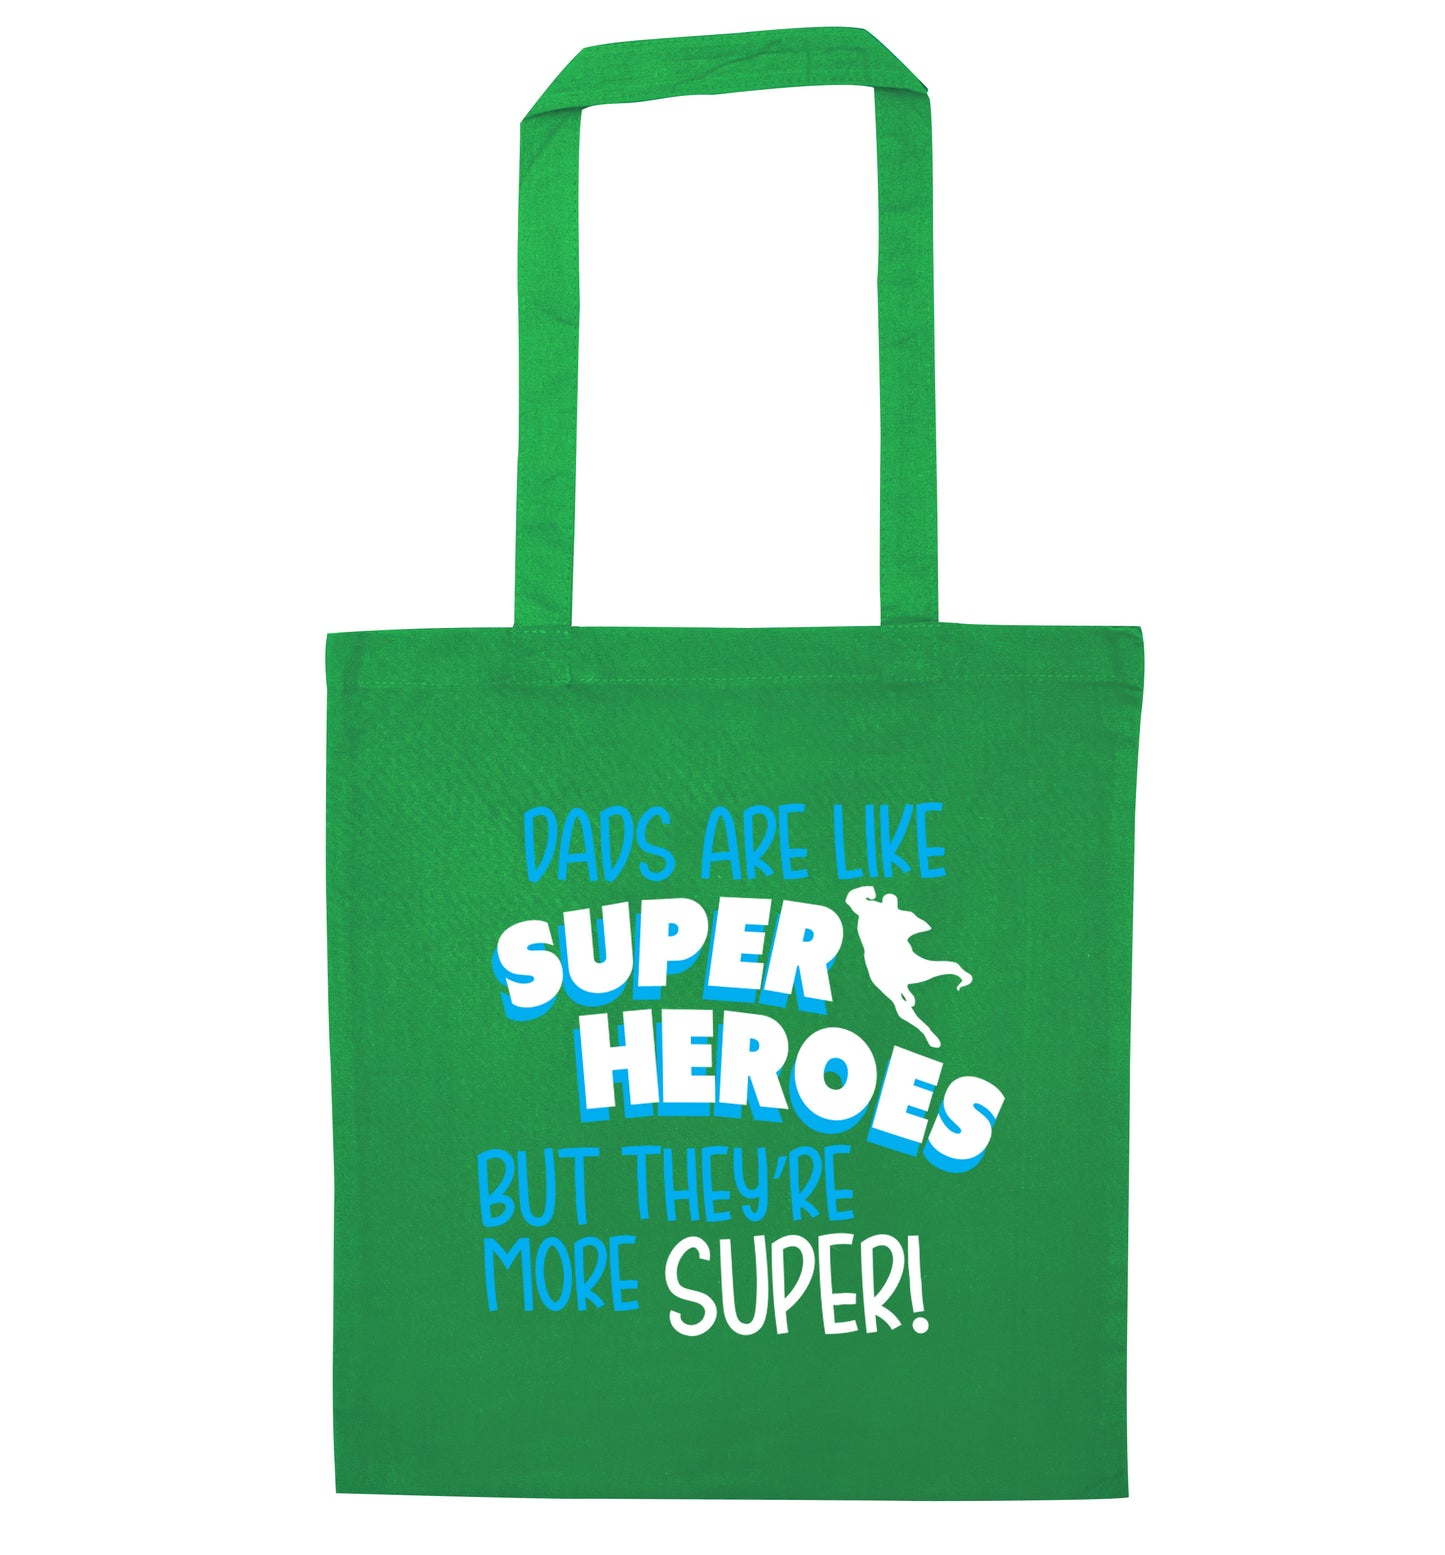 Dads are like superheros but they're more super green tote bag